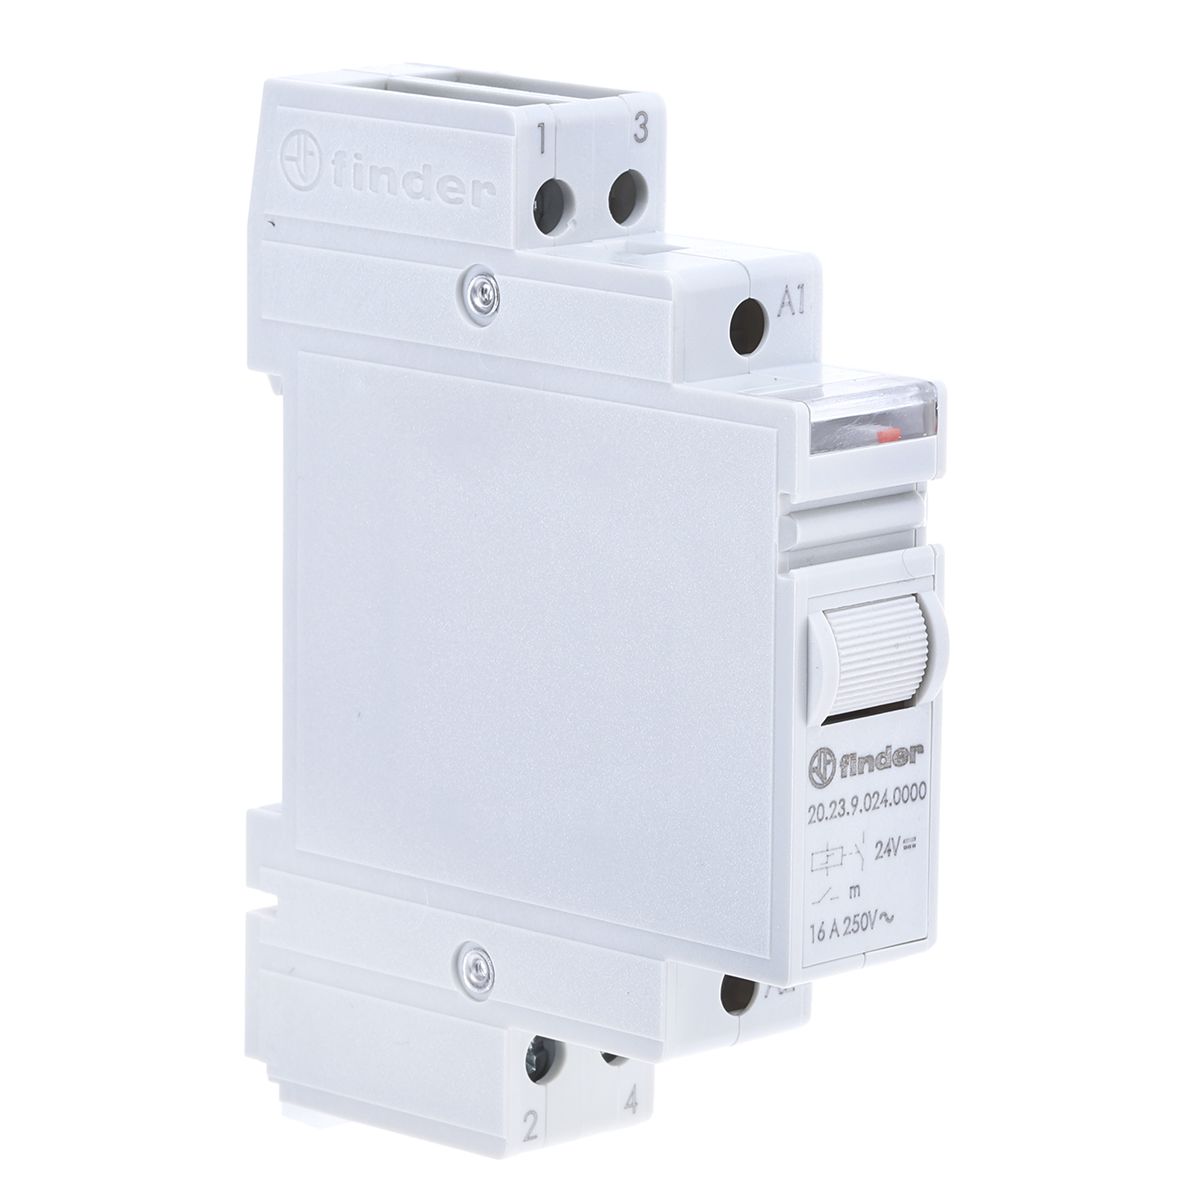 Finder DIN Rail Latching Power Relay, 24V dc Coil, 16A Switching Current, SP-NC, SP-NO